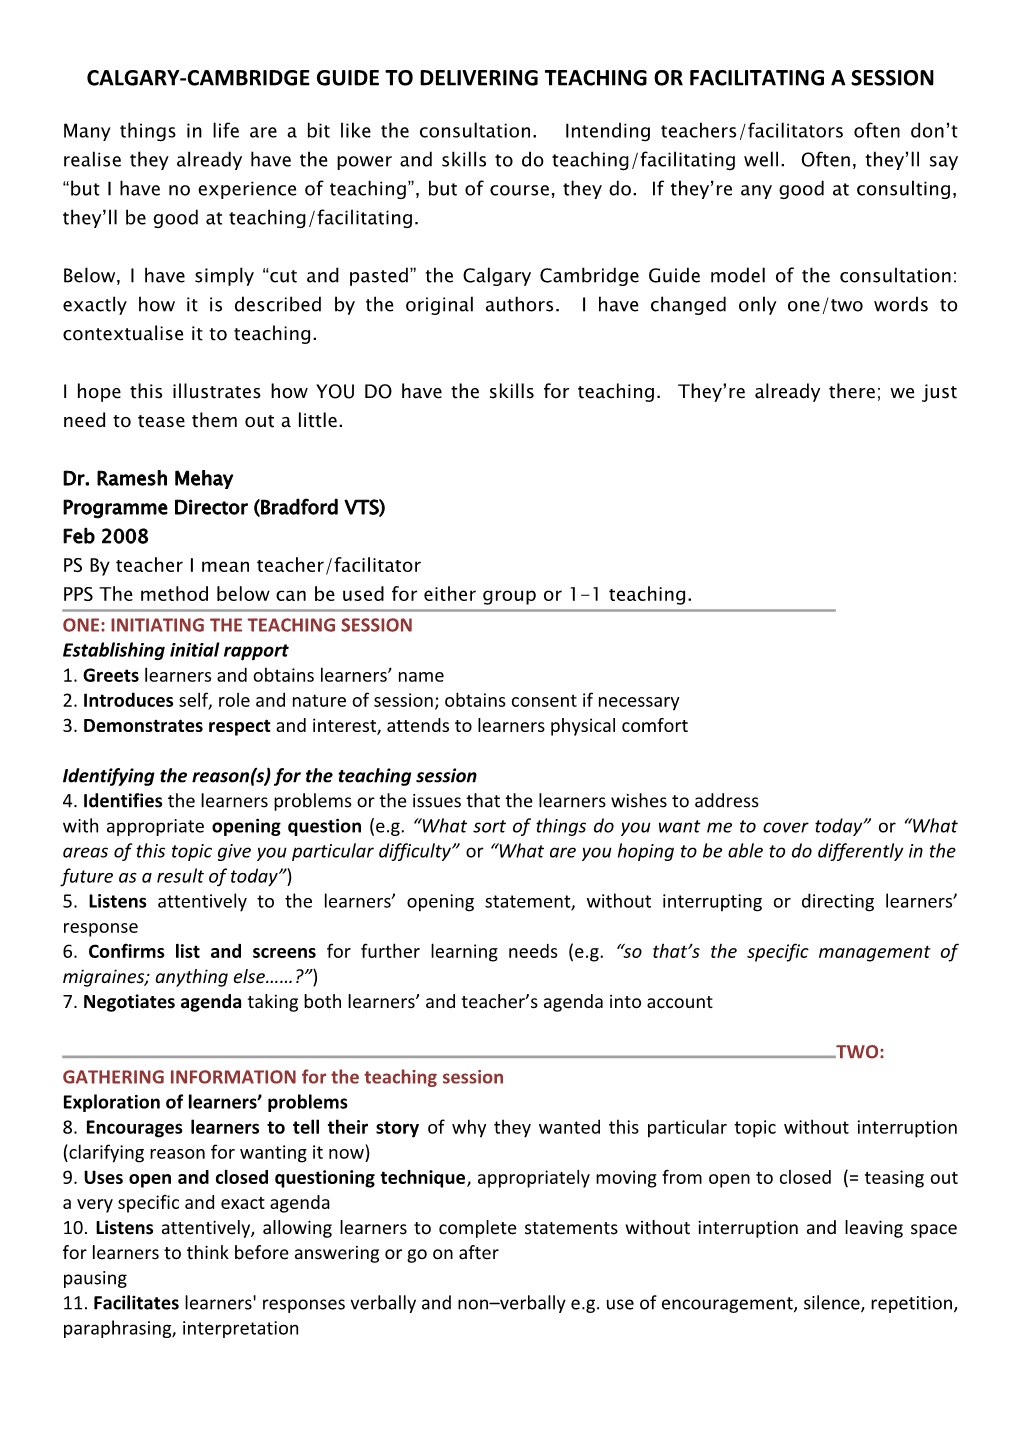 Calgary-Cambridge Guide to Delivering Teaching Or Facilitating a Session